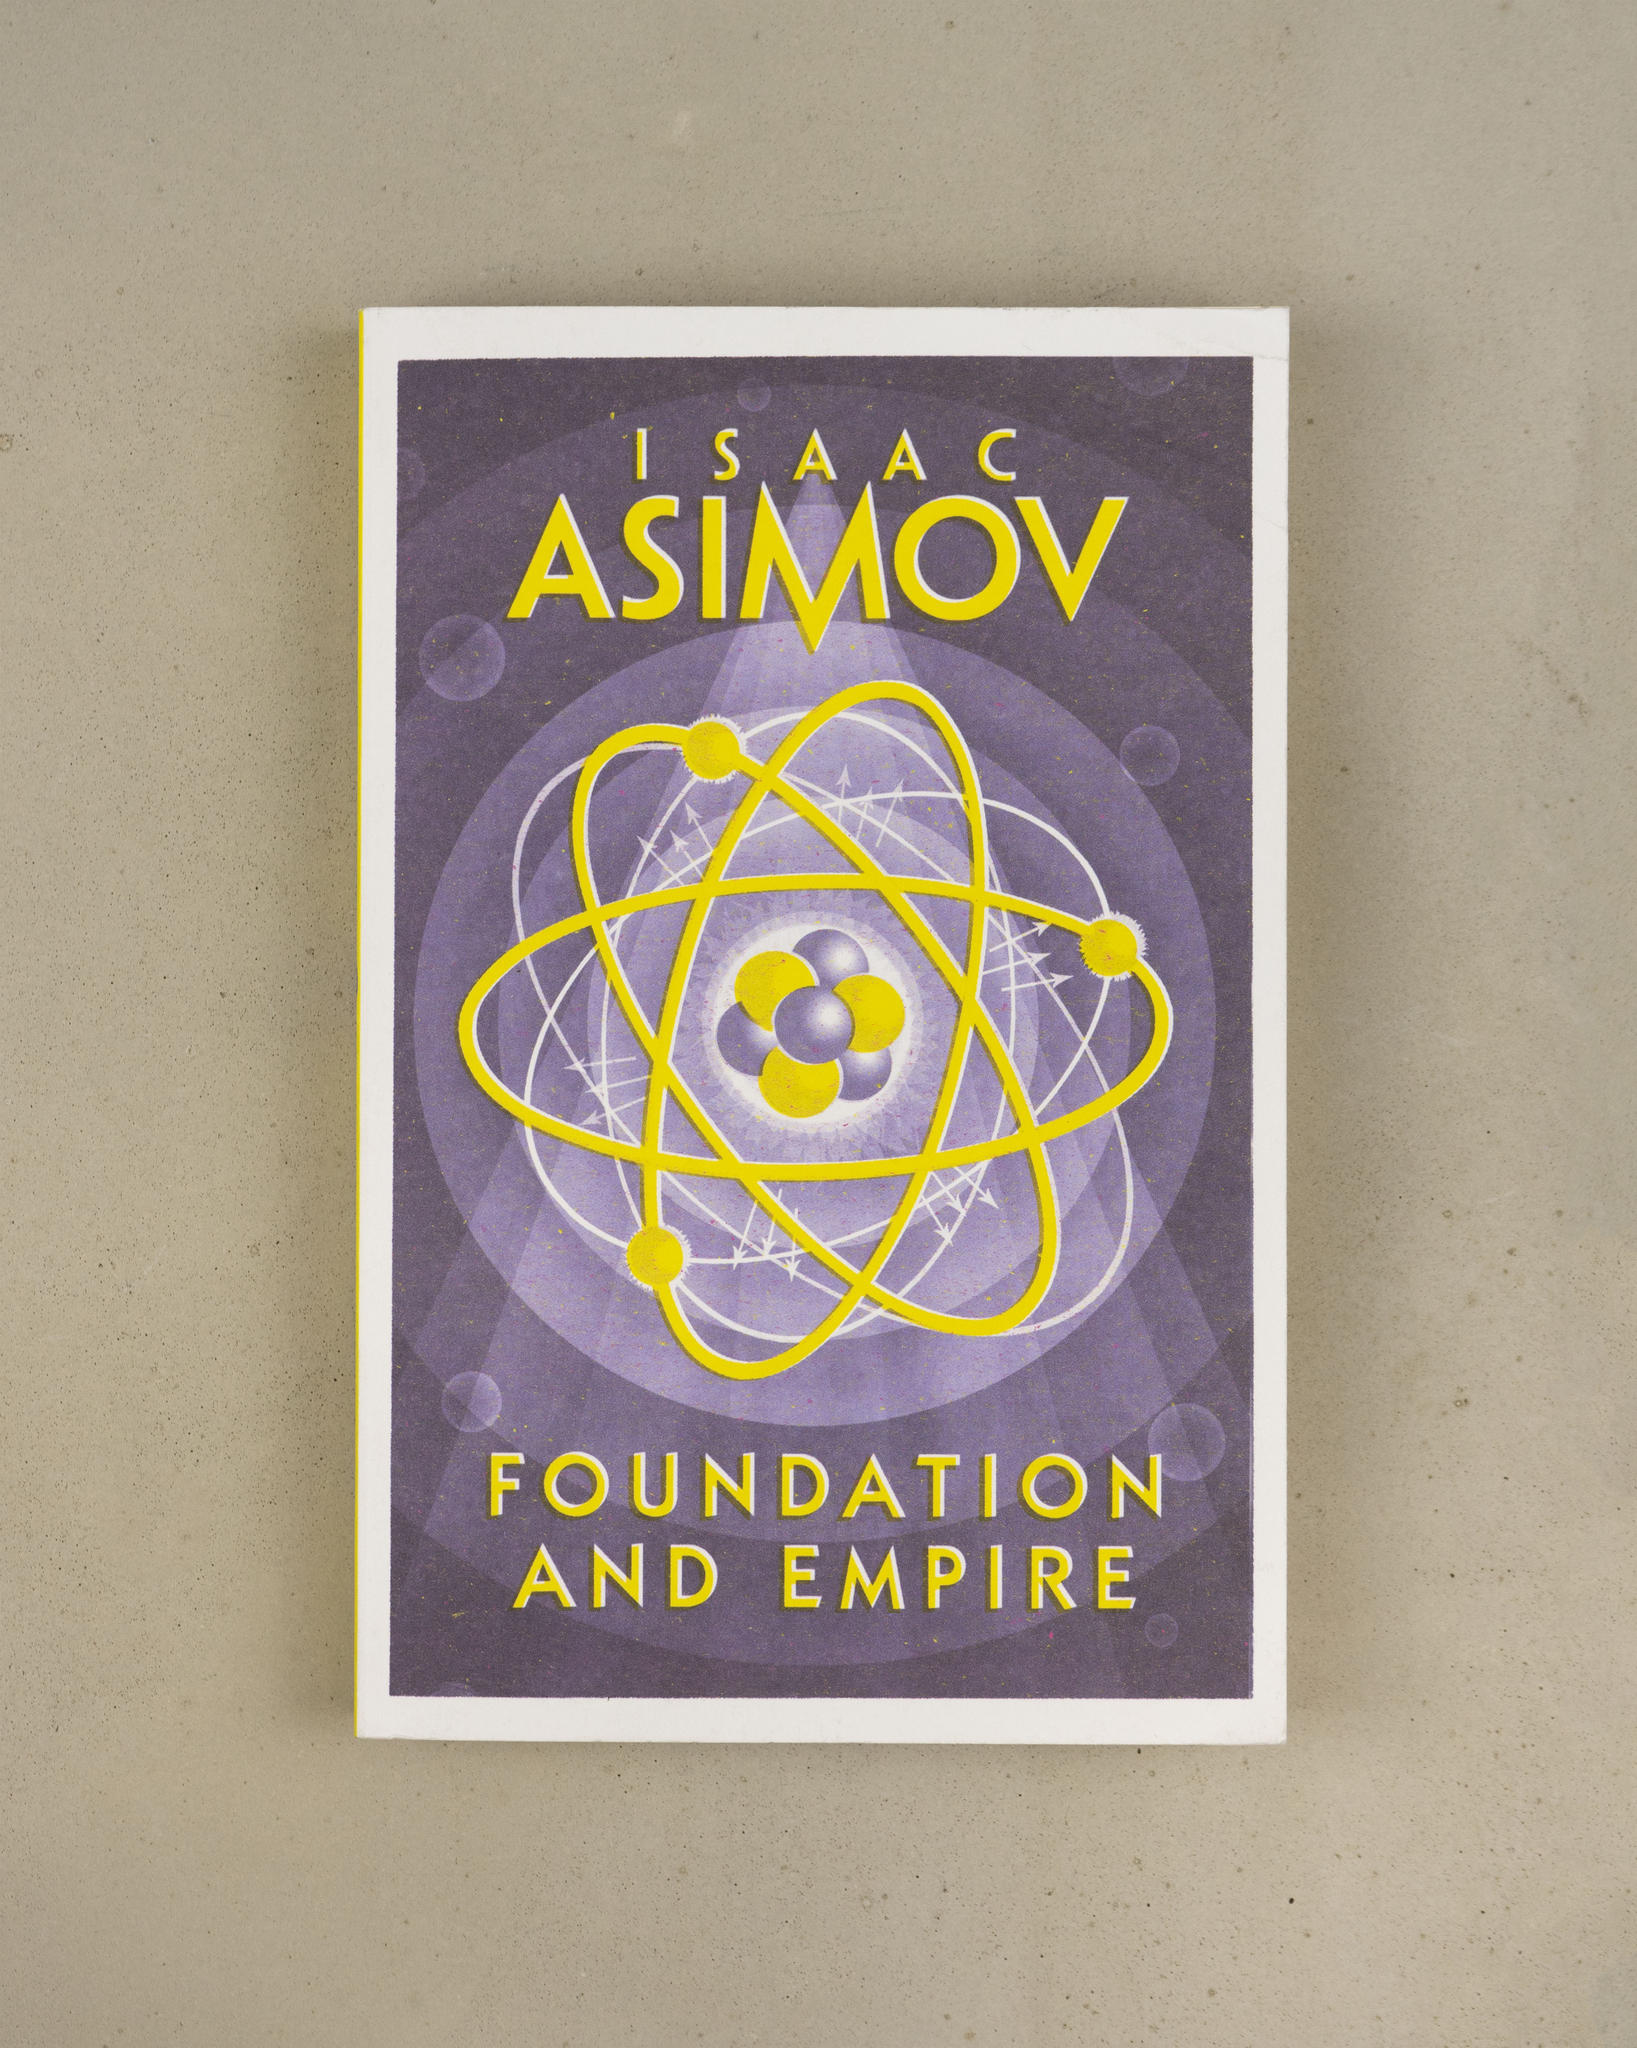 foundation and empire by isaac asimov